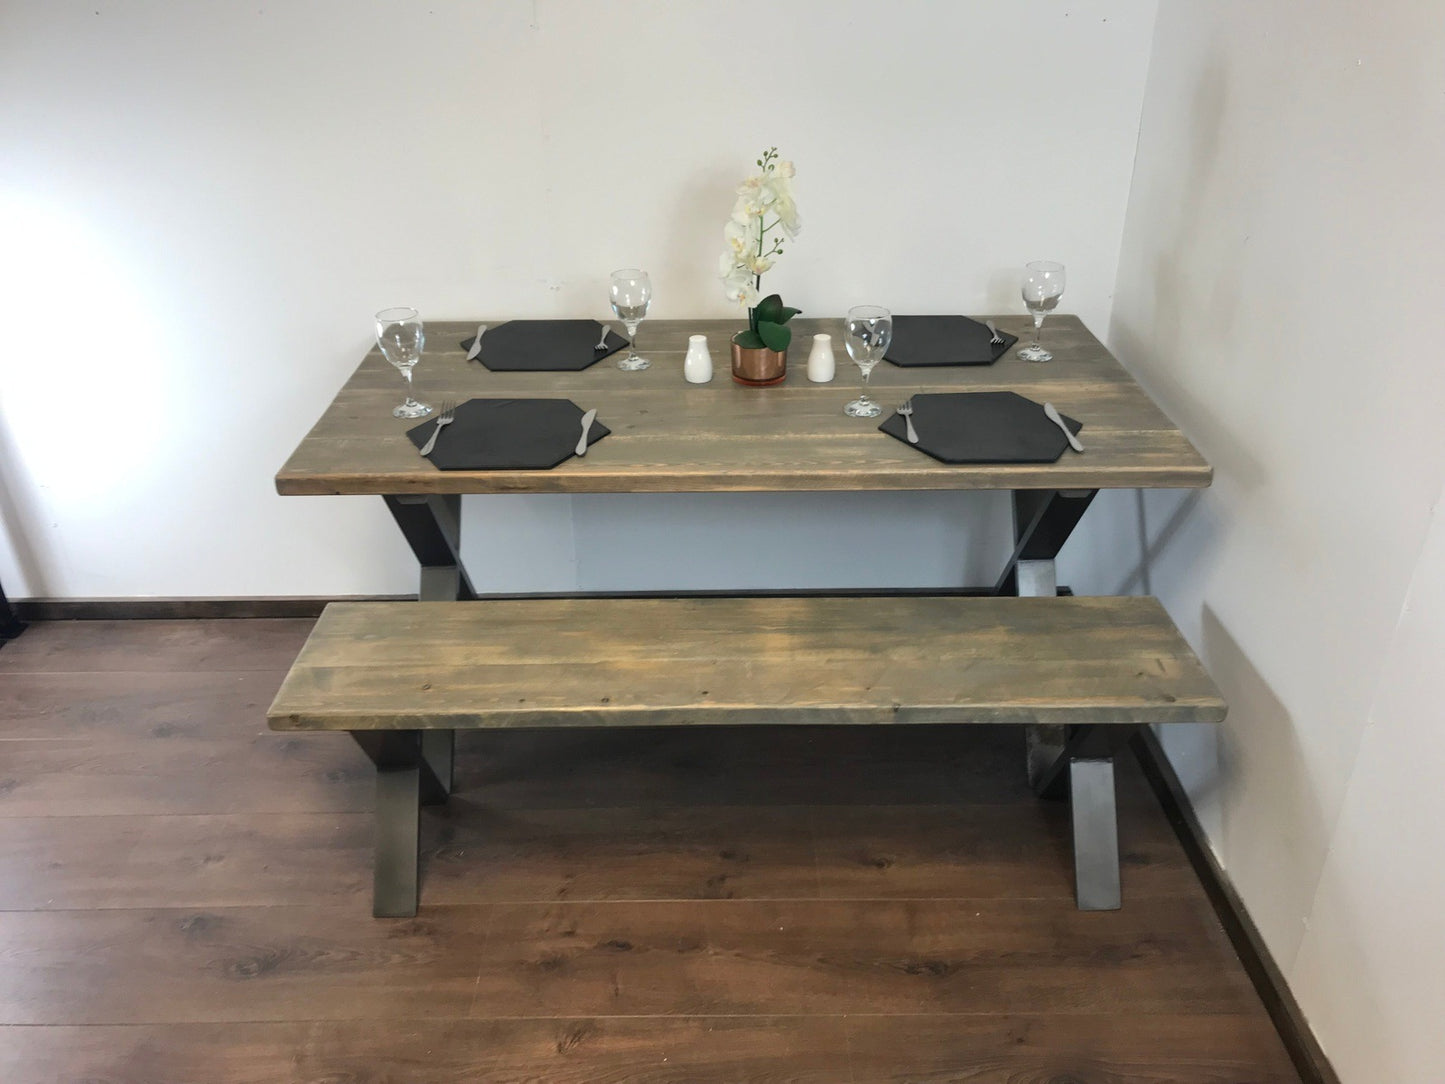 Rustic X-Leg Solid Wood Dining Table Set with Matching Bench Options